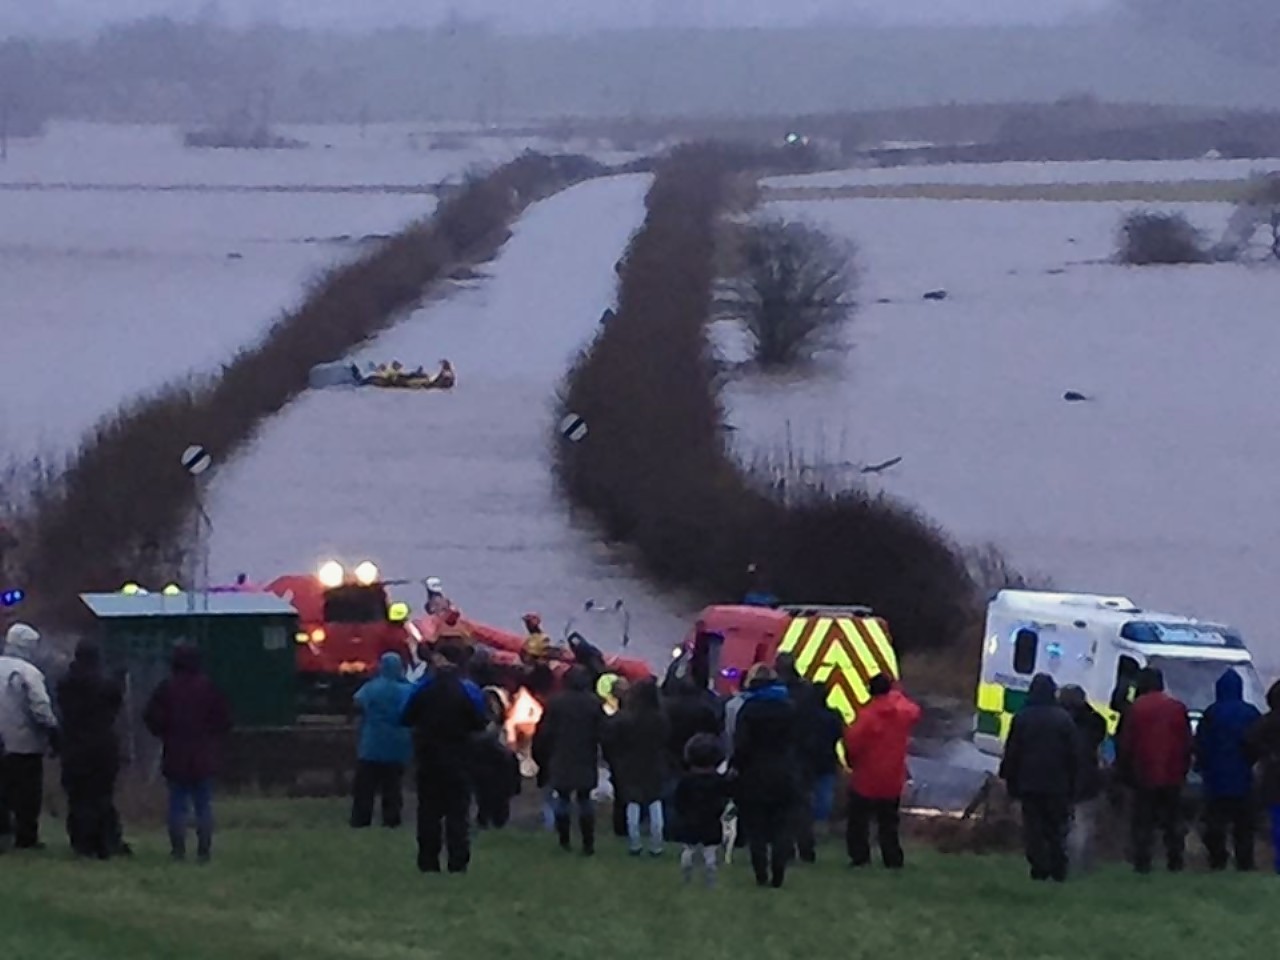 Emergency services rescue a motorist who tried driving through the flooding in Couper Angus